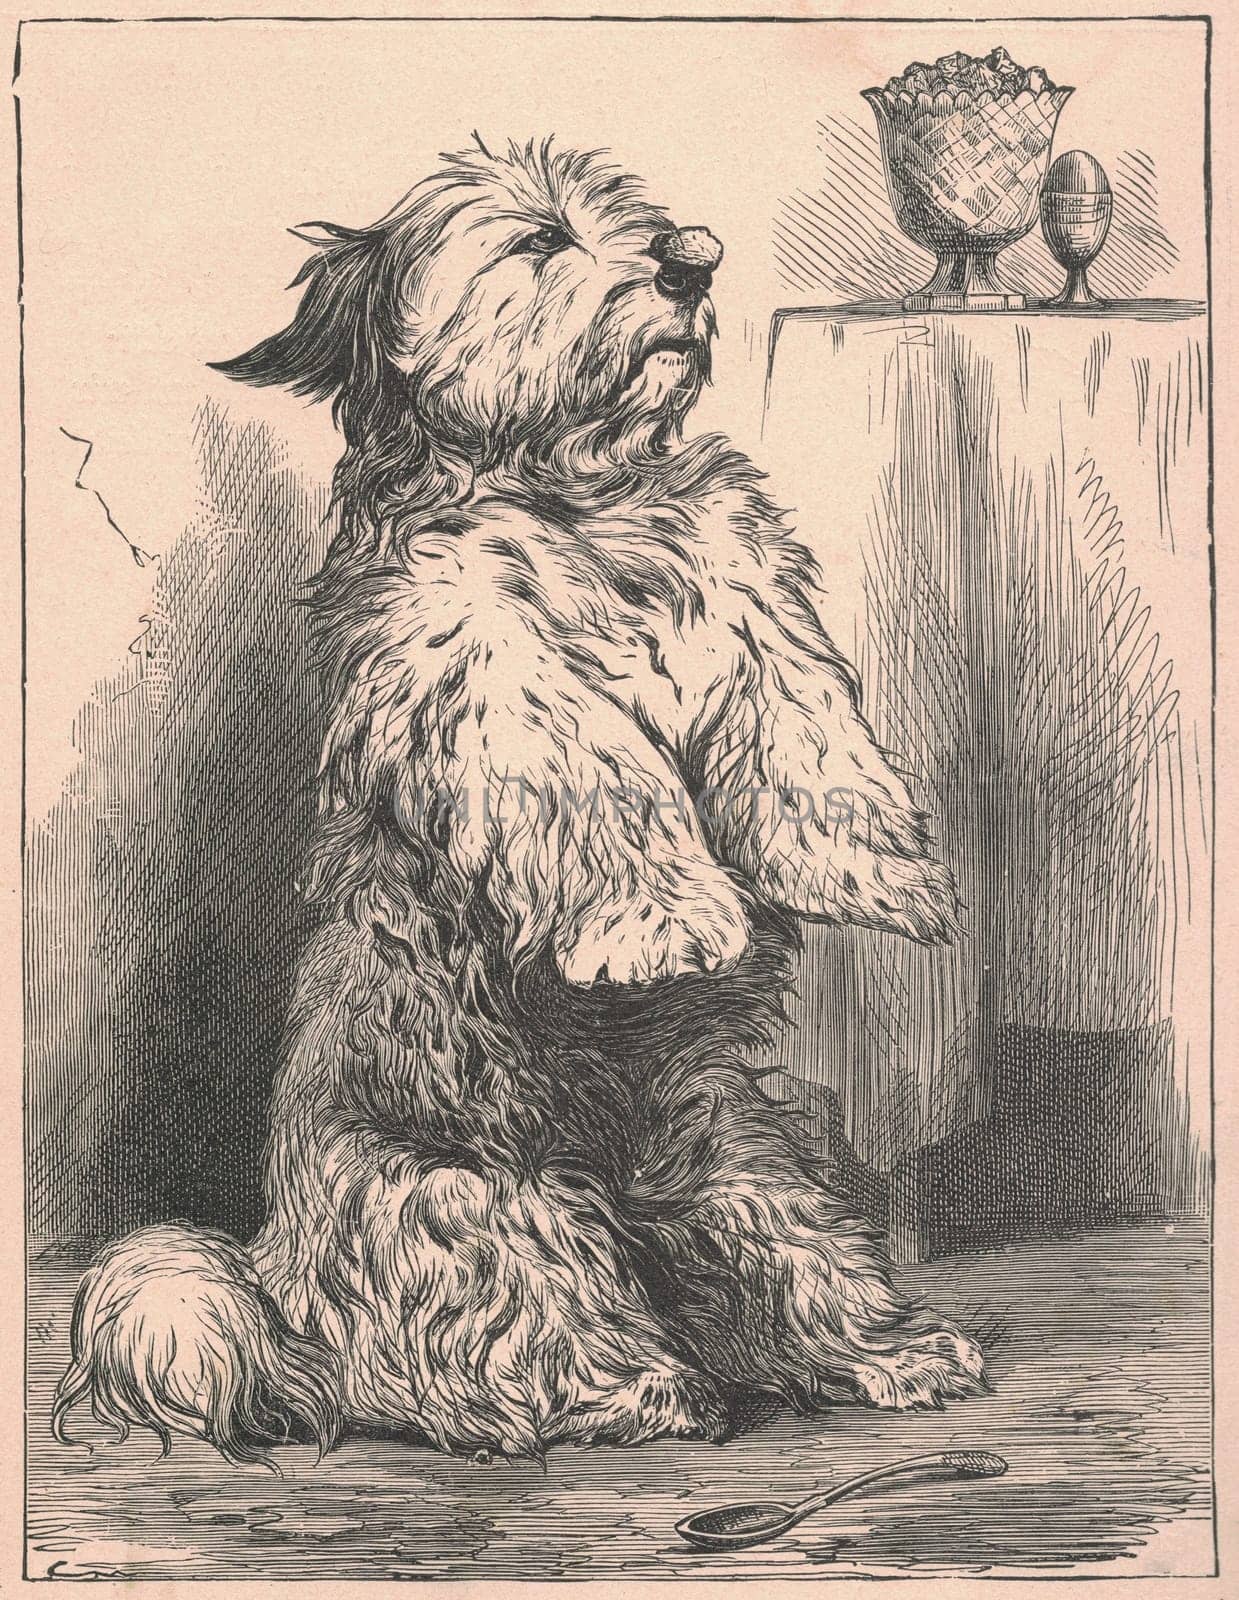 Black and white antique illustration shows a cute doge inside. Vintage drawing shows the dog that sits up on its hind legs. Old picture from fairy tale book. Storybook illustration published 1910. A fairy tale, fairytale, wonder tale, magic tale, fairy story or Marchen is an instance of folklore genre that takes the form of a short story. Such stories typically feature mythical entities such as dwarfs, dragons, elves, fairies and Peris, giants, Divs, gnomes, goblins, griffins, mermaids, talking animals, trolls, unicorns, or witches, and usually magic or enchantments.